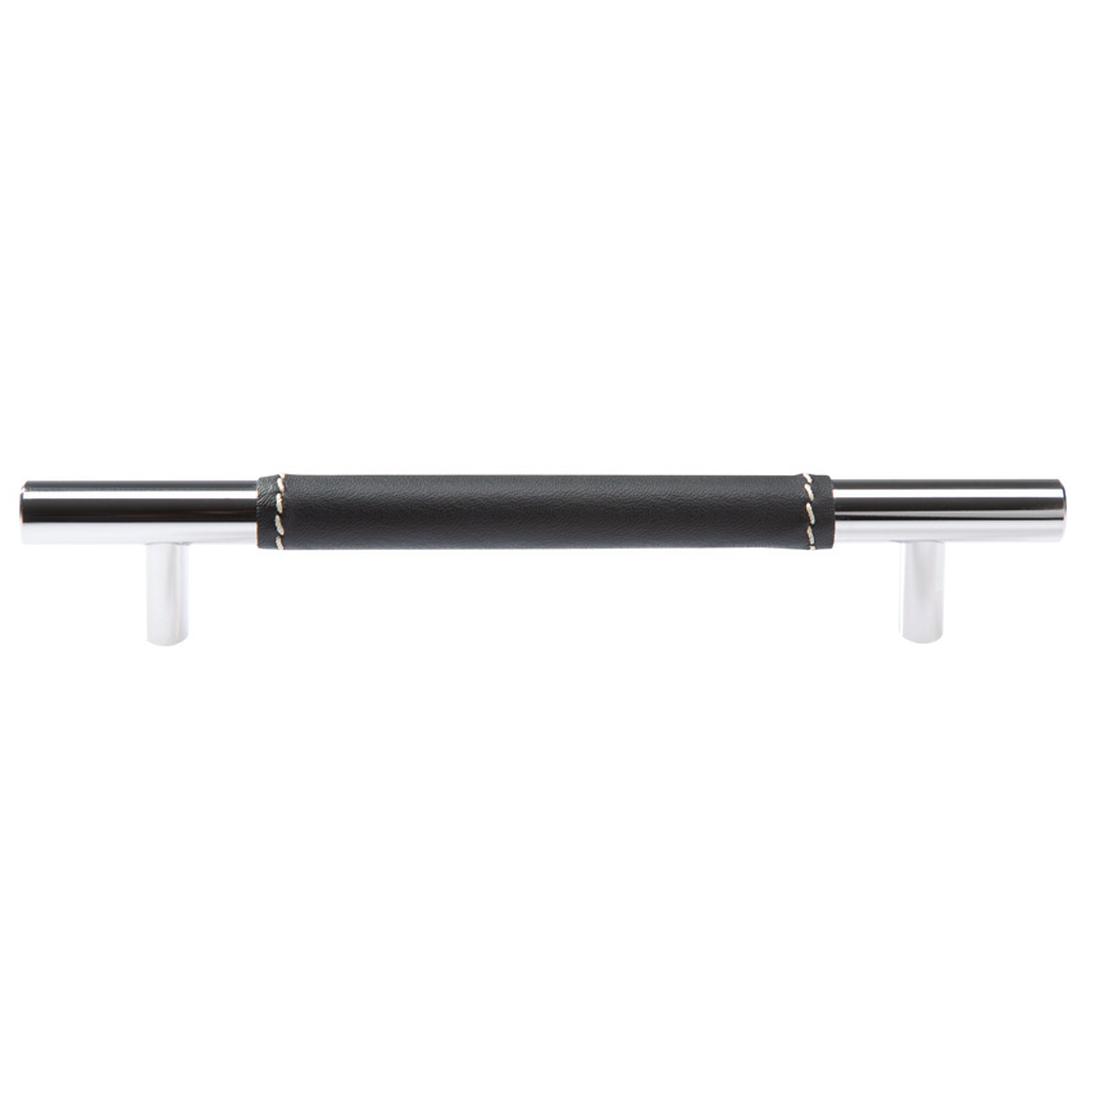 Beyerle Hardware Ceres Bar Handle with Stitched Leather-DirectSinks